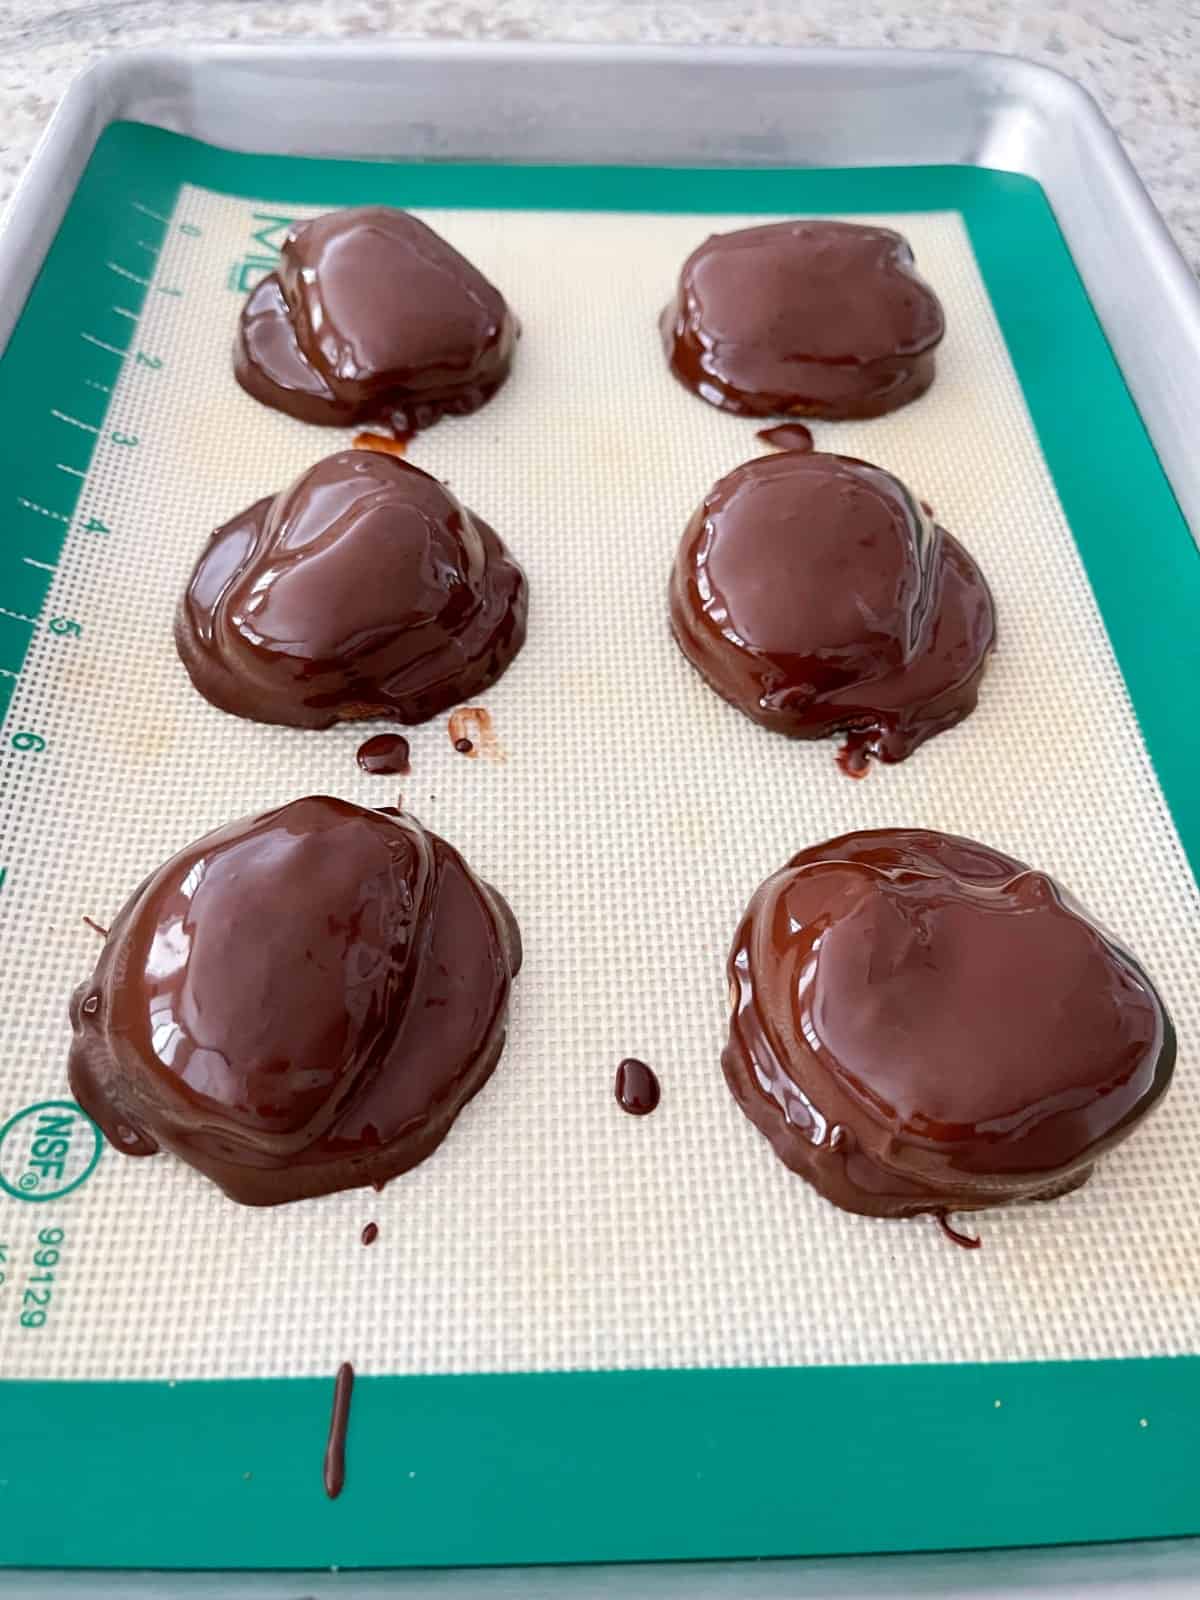 Chocolate marshmallow fluff cookies on silicone line quarter sheet pan.